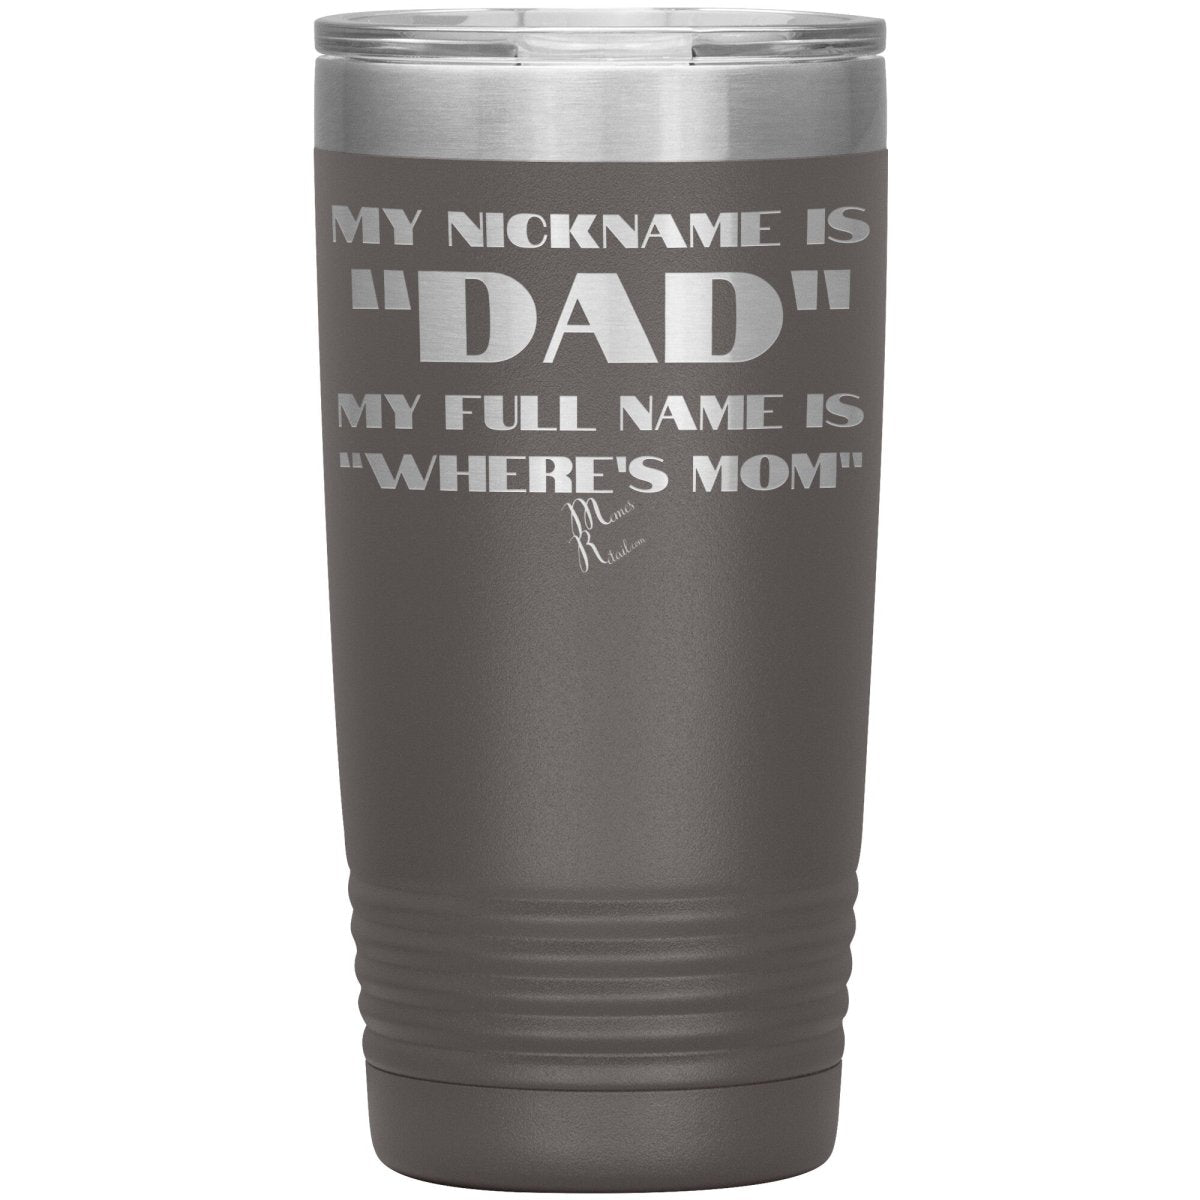 My Nickname is "Dad", My Full Name is "Where's Mom" Tumblers, 20oz Insulated Tumbler / Pewter - MemesRetail.com